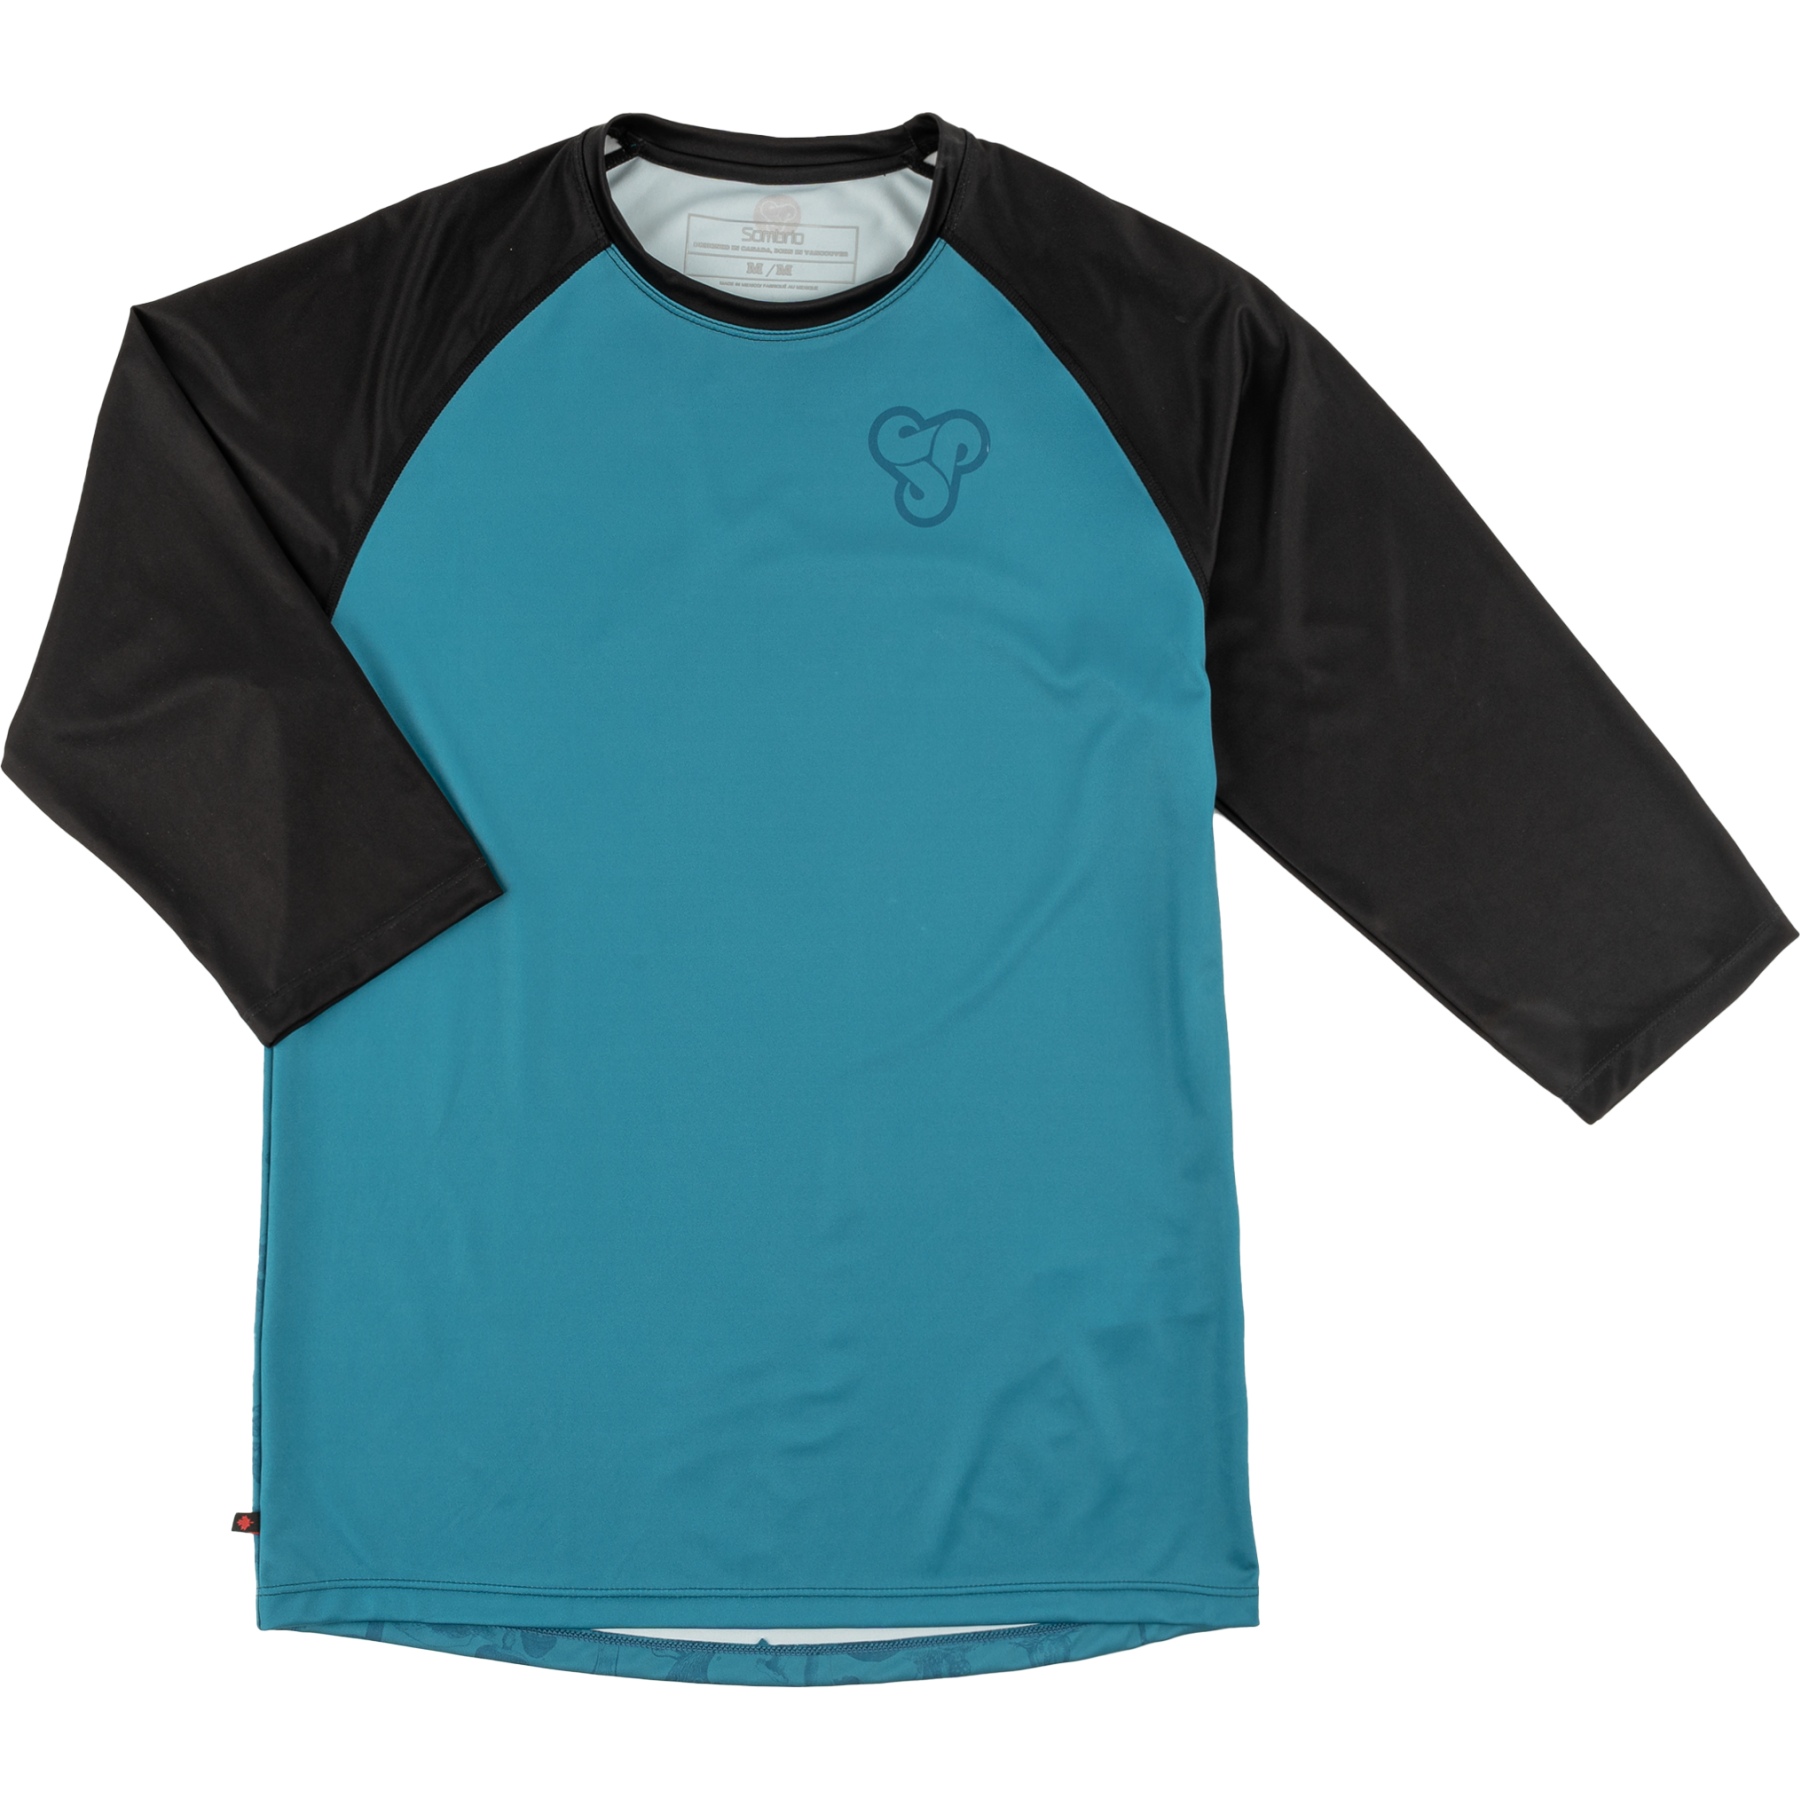 Picture of Sombrio Freeride Chaos 2 Jersey - Mushrooms Boreal Blue